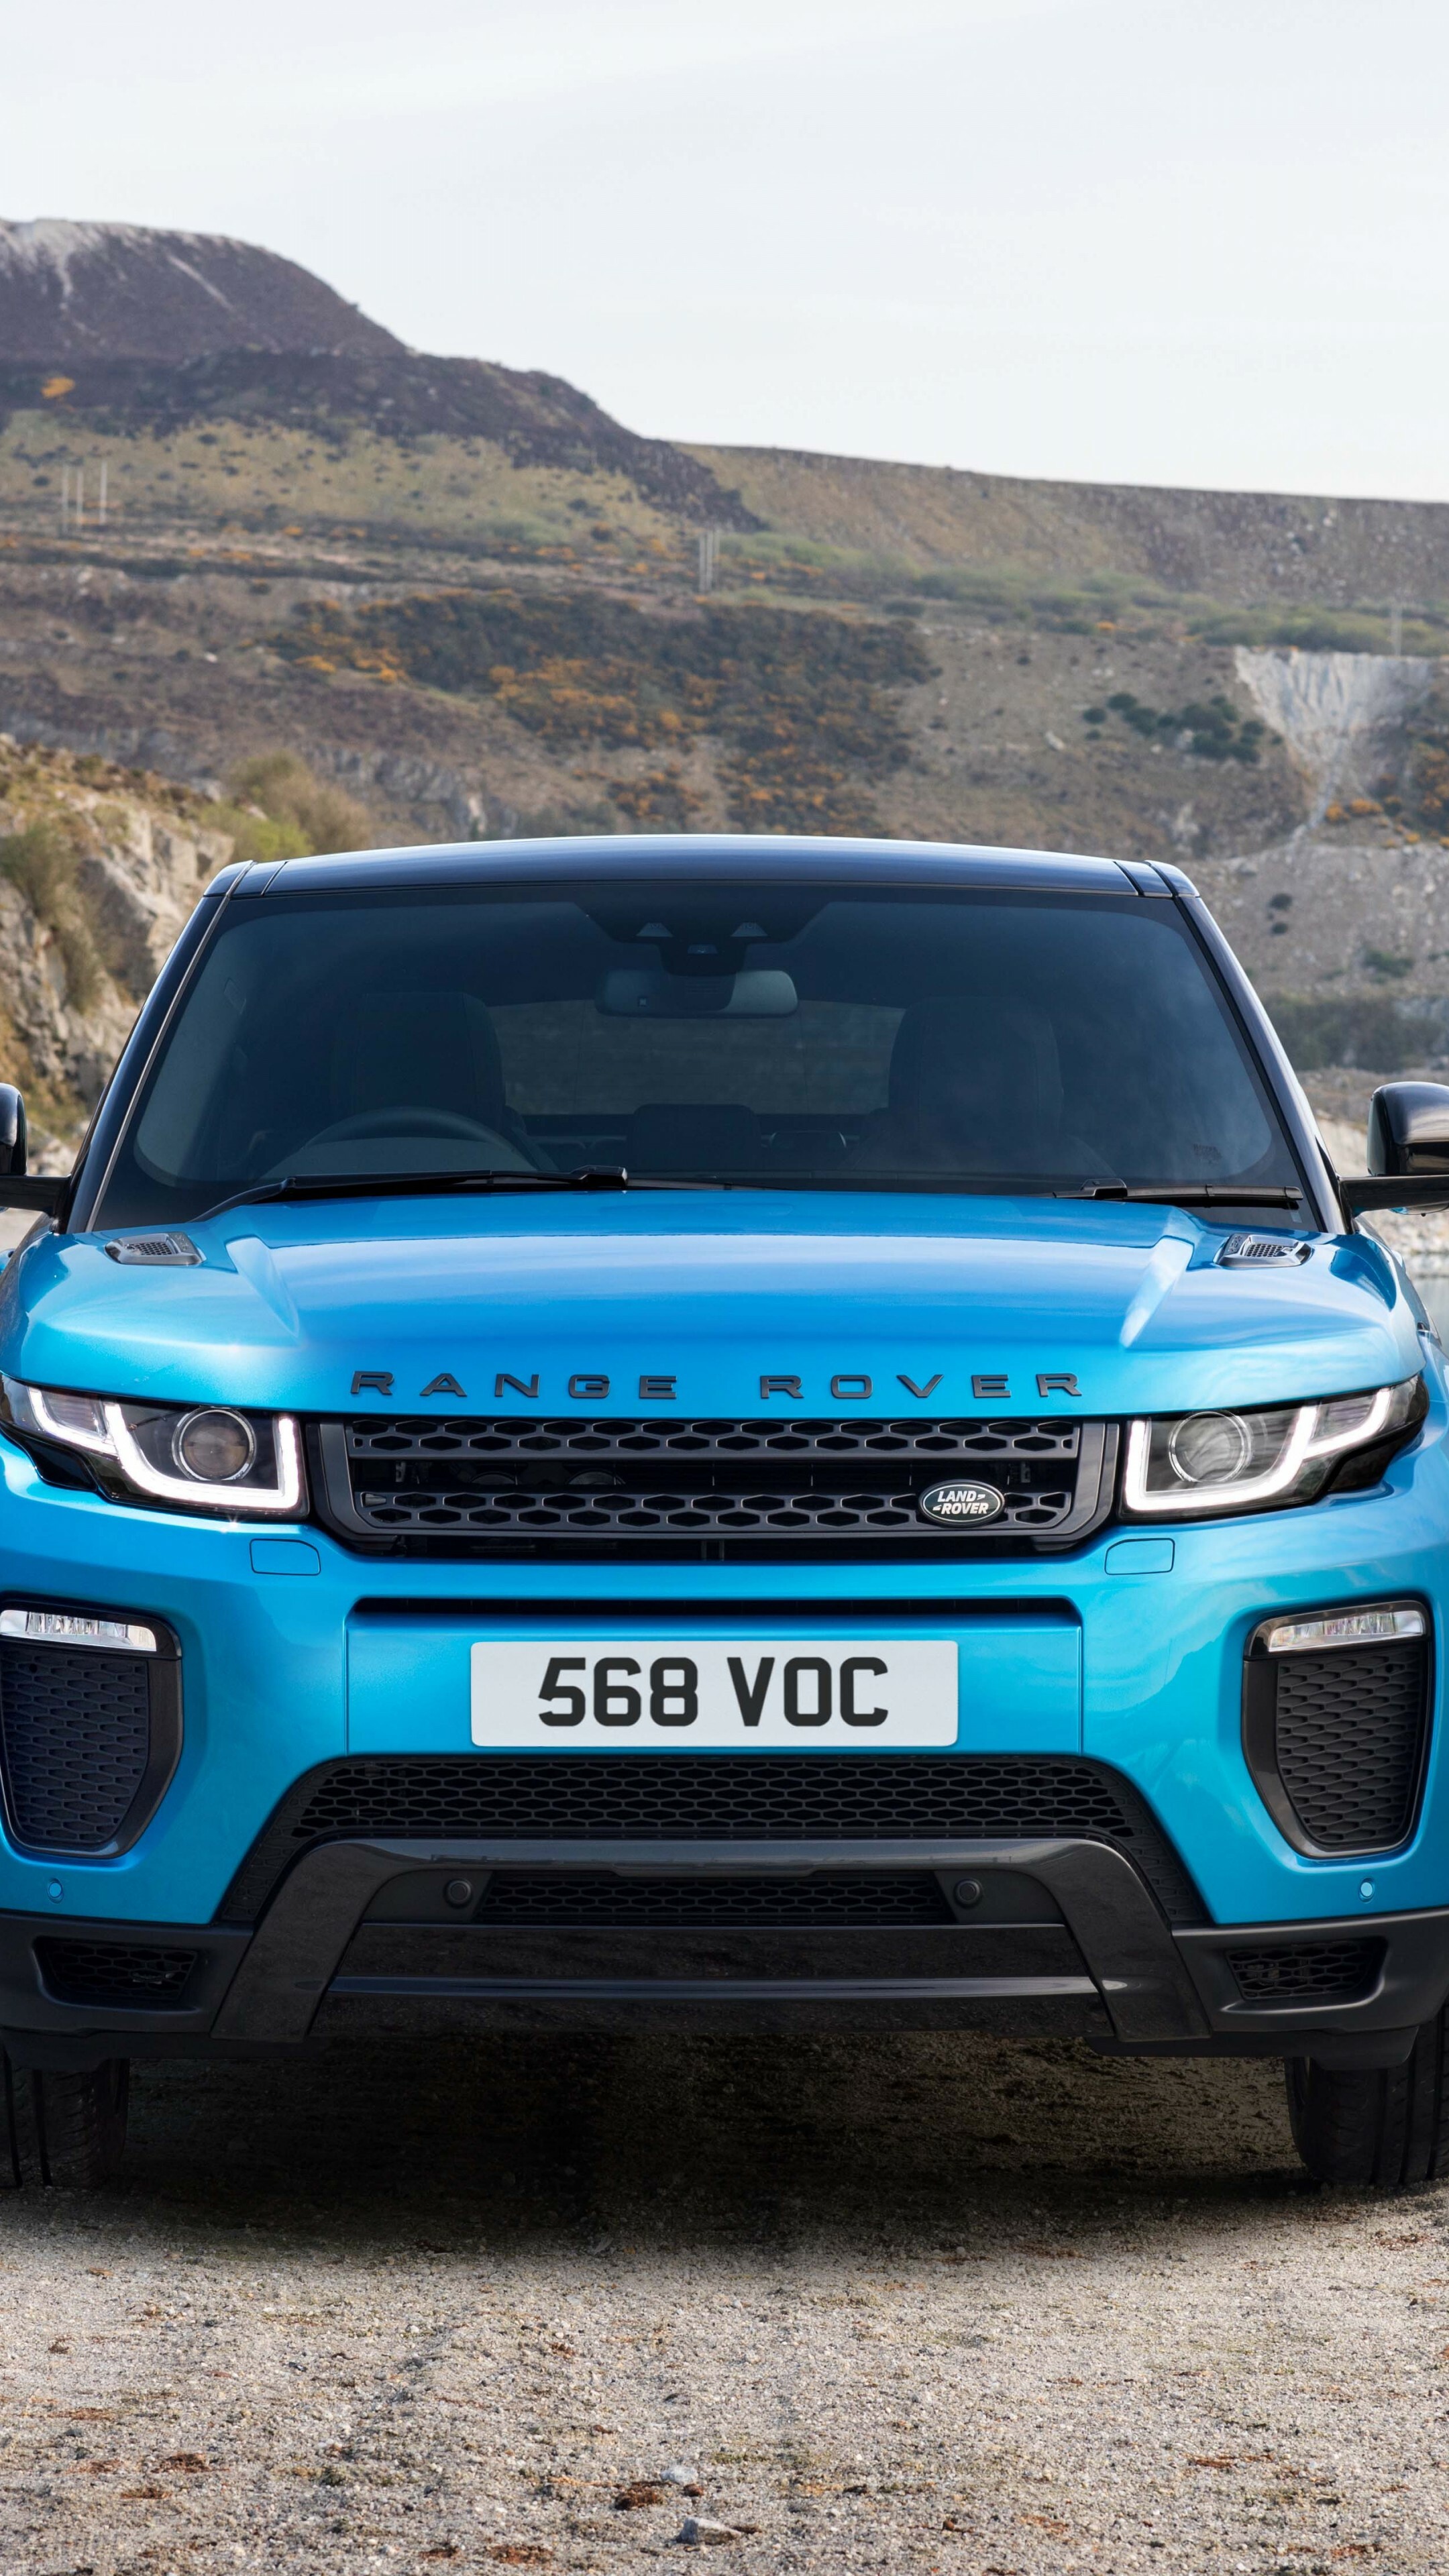 Range Rover: Model Evoque 2019, Introduced in 2011, Vehicle. 2160x3840 4K Background.